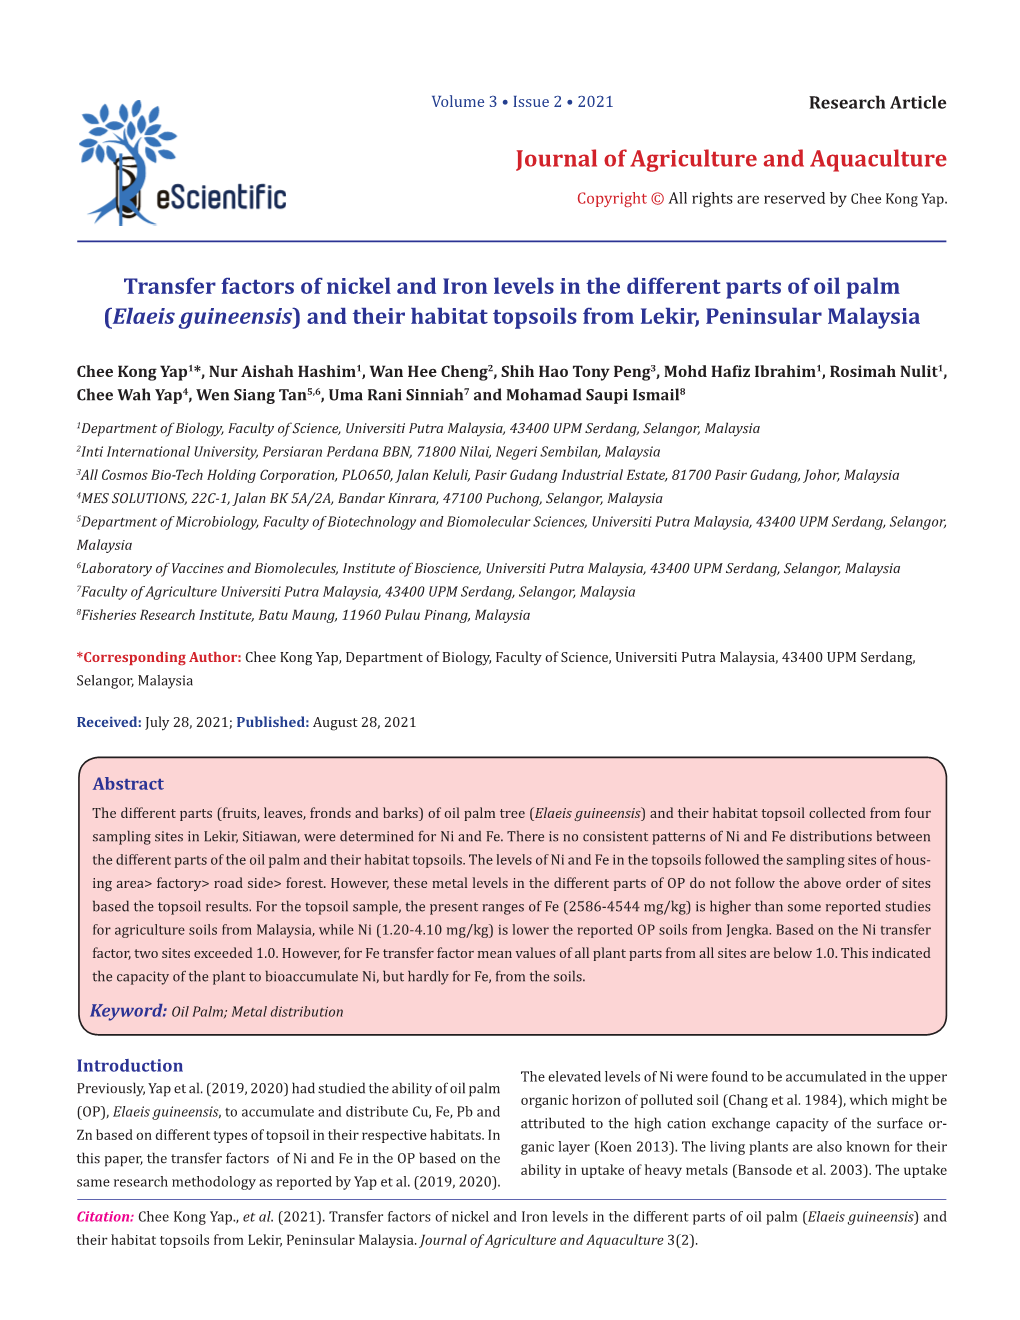 Journal of Agriculture and Aquaculture